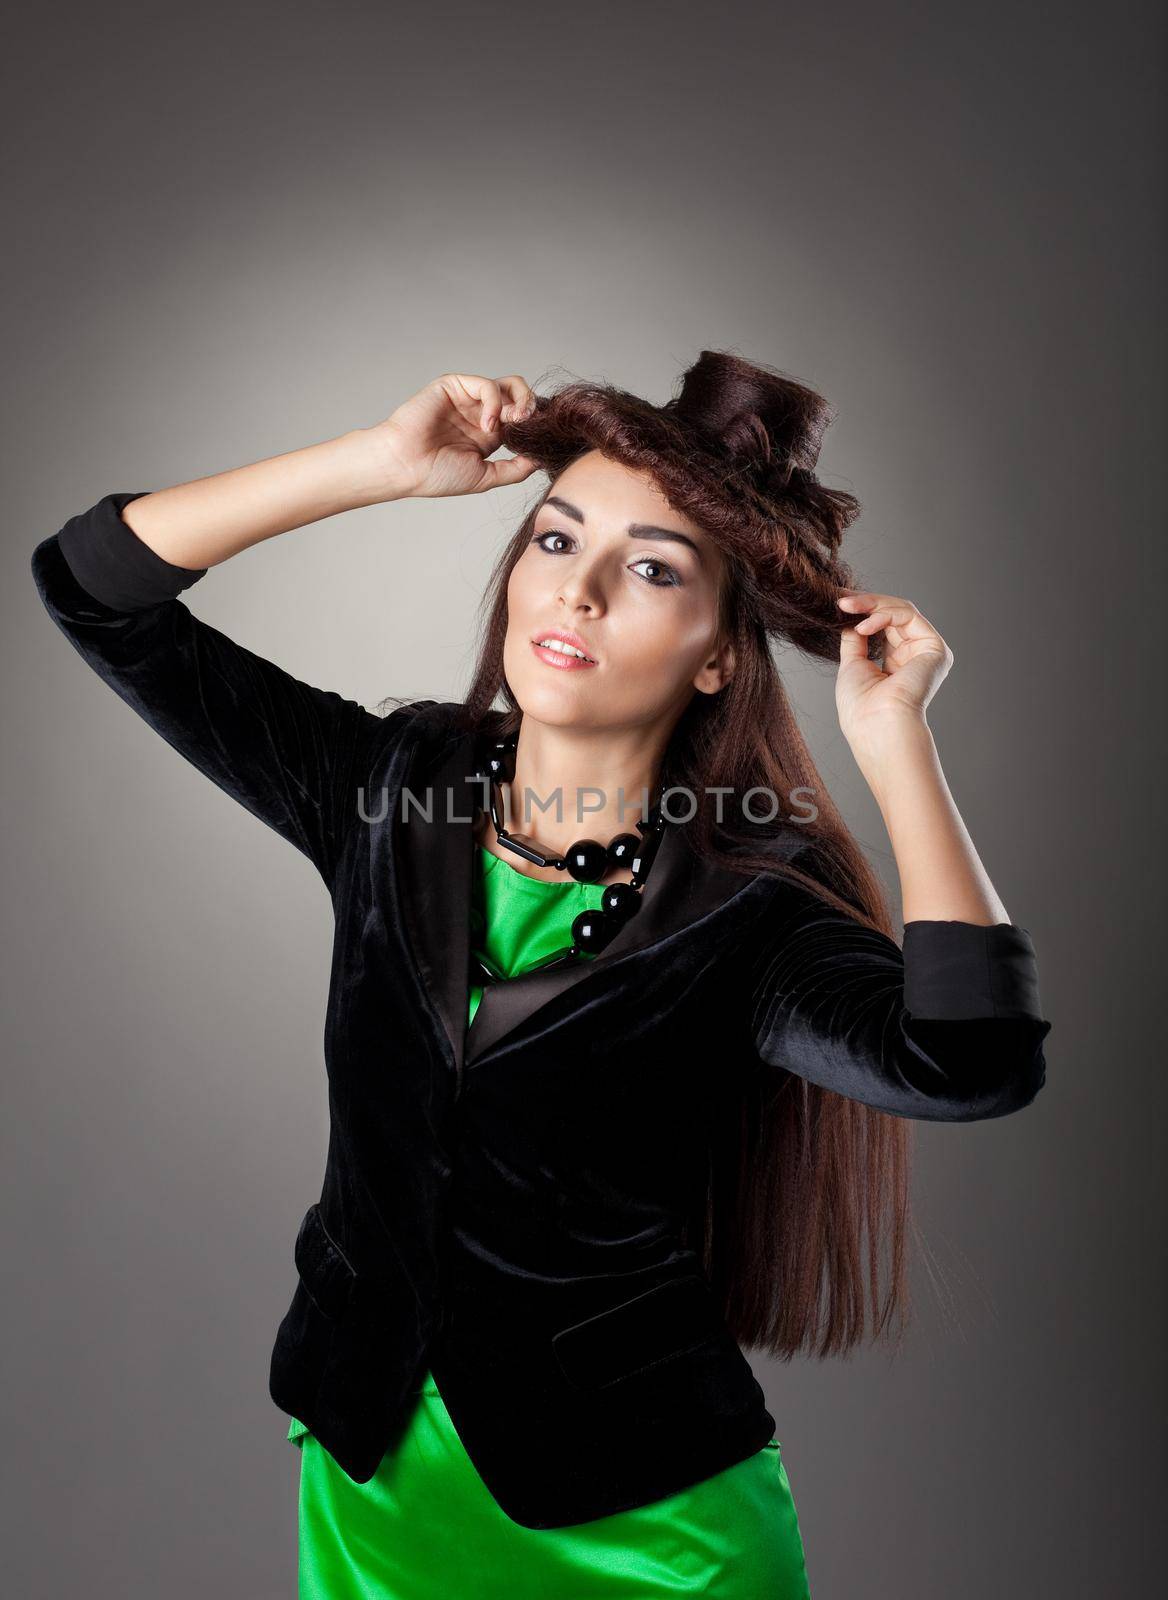 Beauty brunette woman portrait with hair style hat in green suit and black jacket